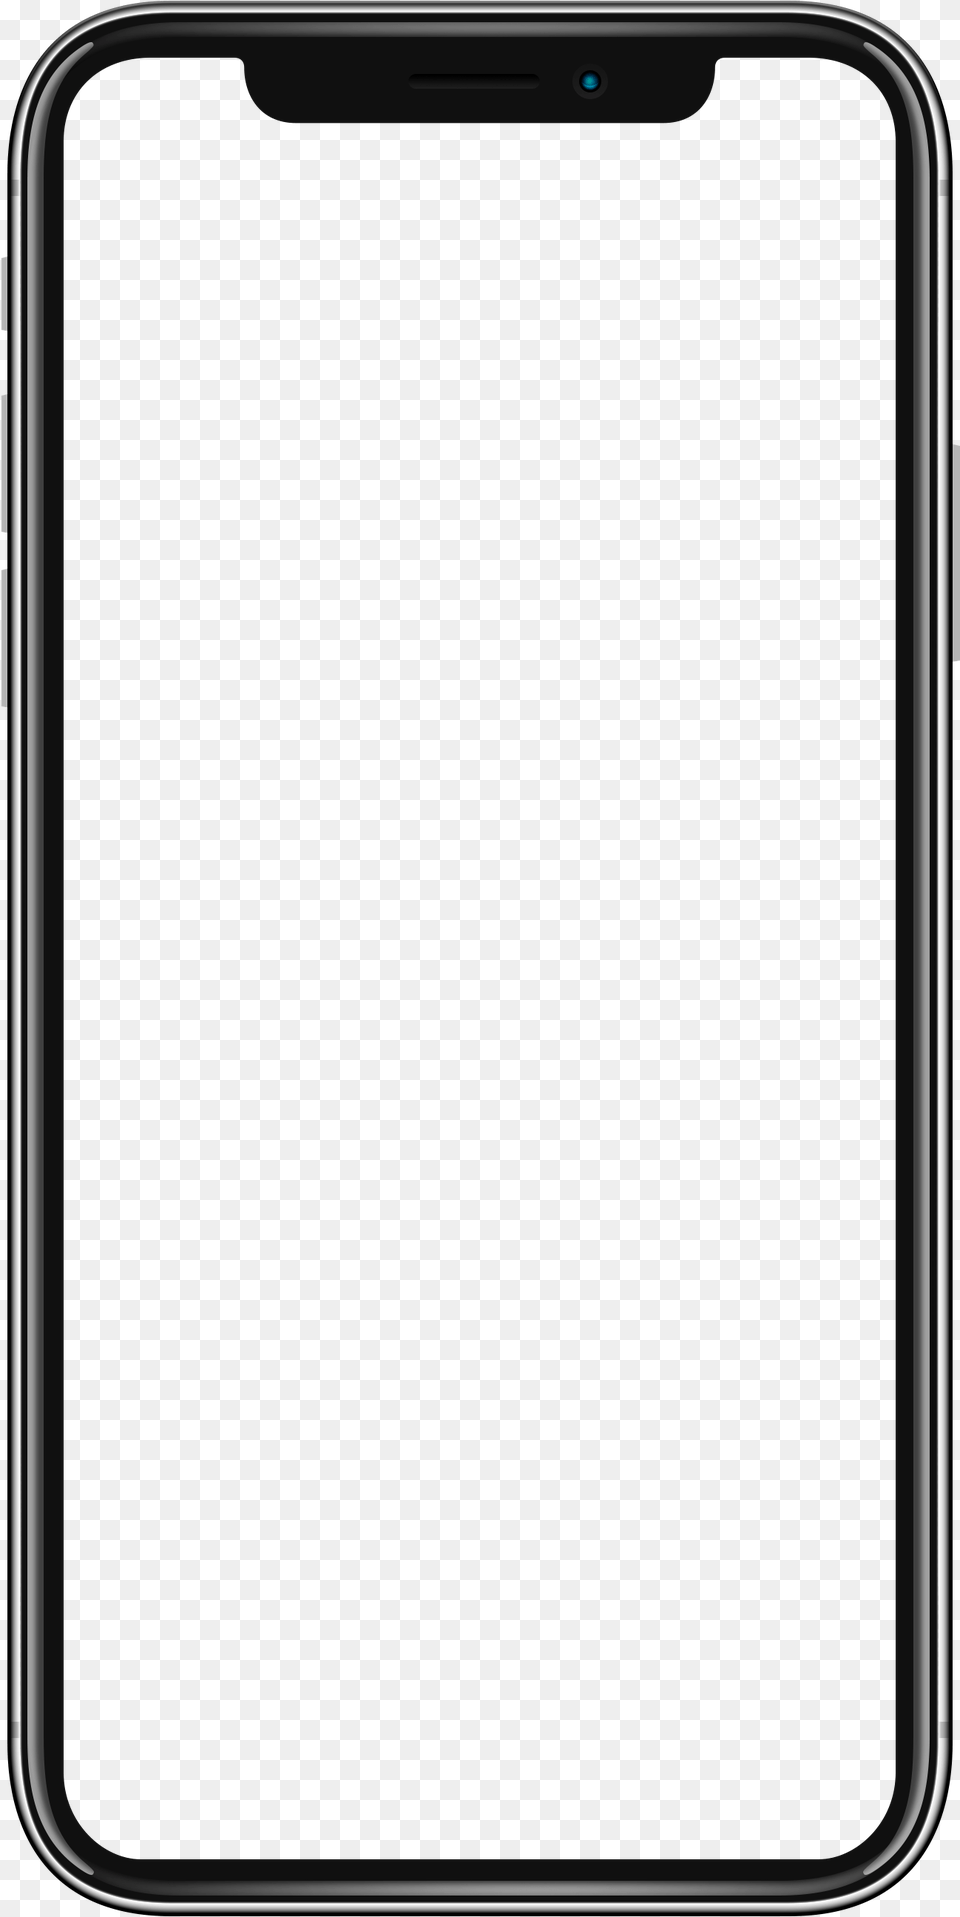 Iphone X Frame Iphone X Frame Hd, Electronics, Mobile Phone, Phone Png Image